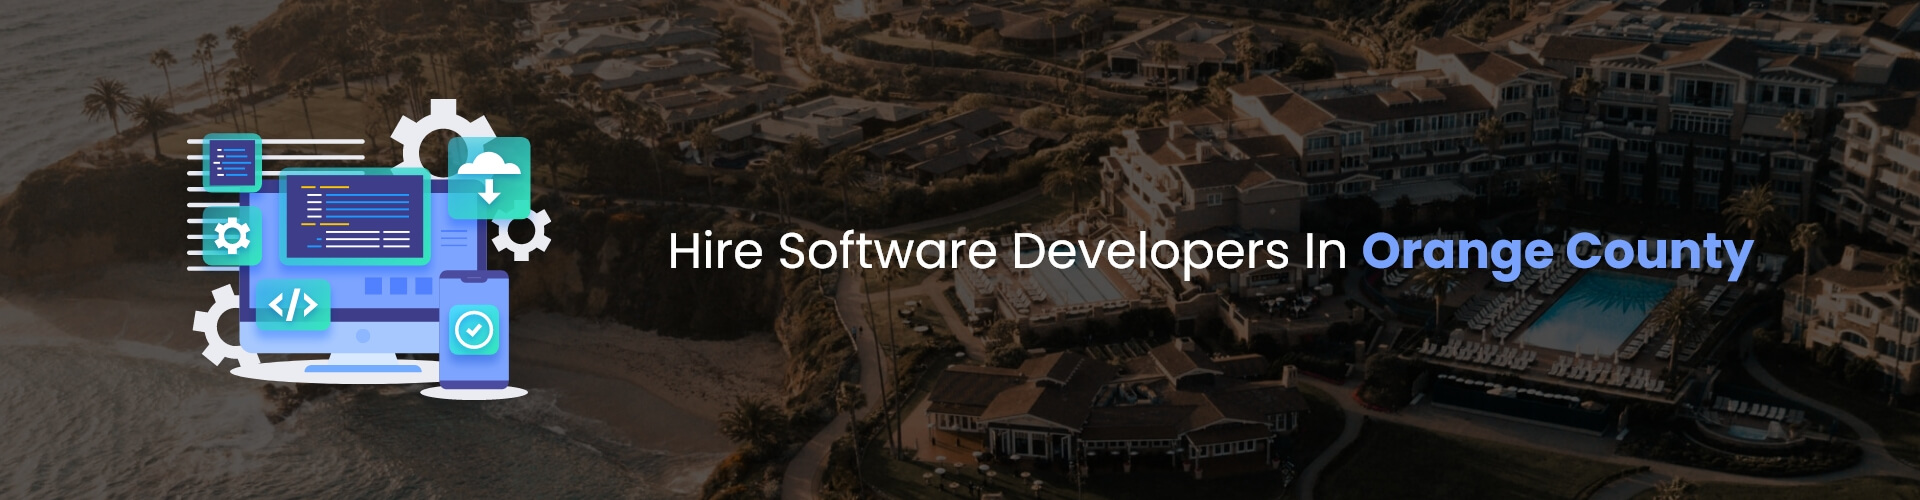 hire software developers in orange county